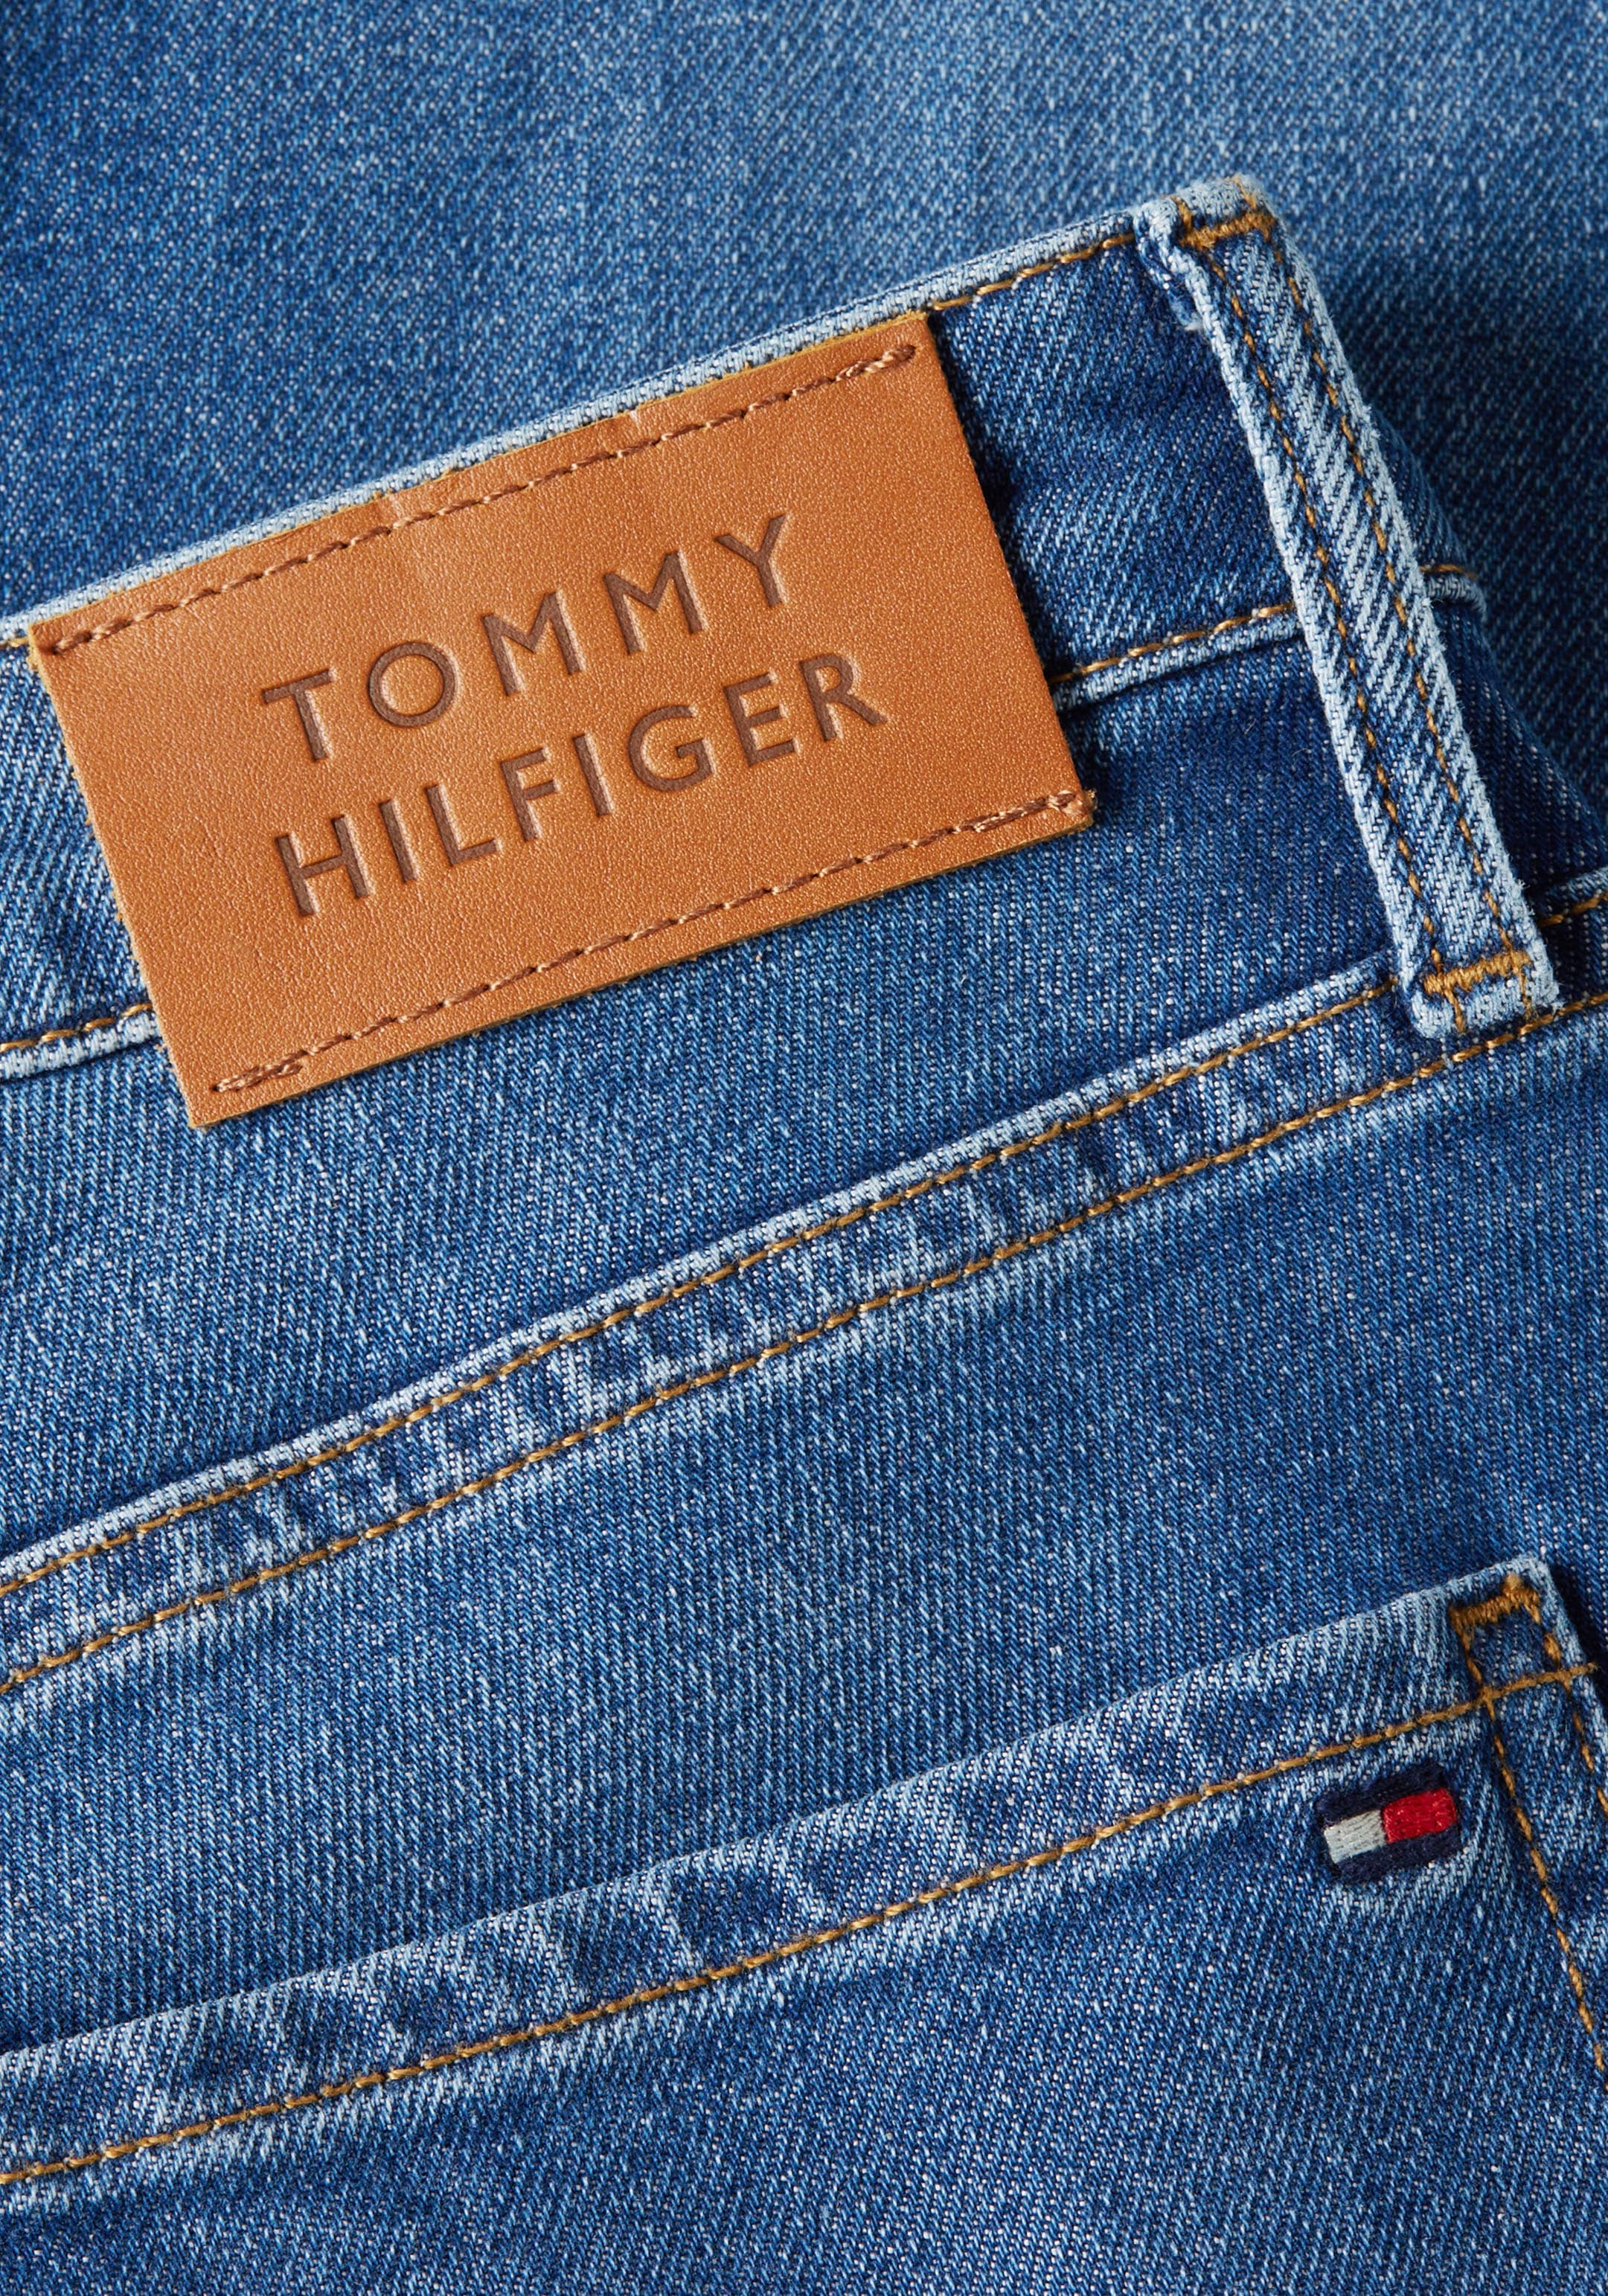 Tommy Hilfiger Bootcut-Jeans »BOOTCUT Hilfiger Tommy bei RW Logo- PATY«, mit Badge online